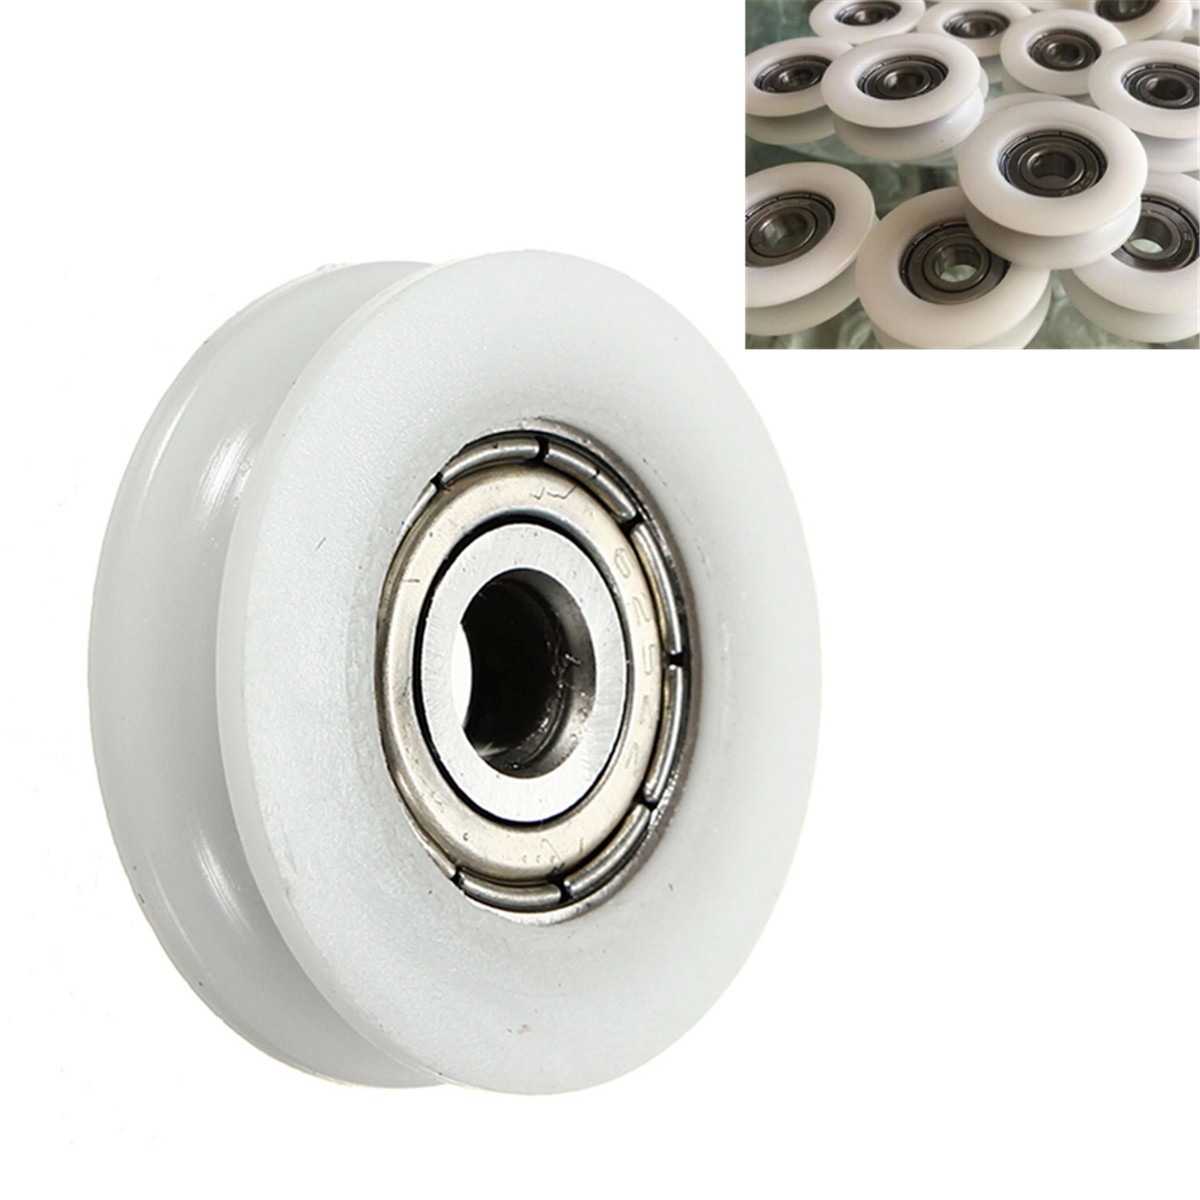 10pcs-5x24x7mm-Ball-Bearing-U-Groove-Nylon-Round-Pulley-Wheel-Roller-For-38mm-Rope-Ball-Bearing-1576319-7